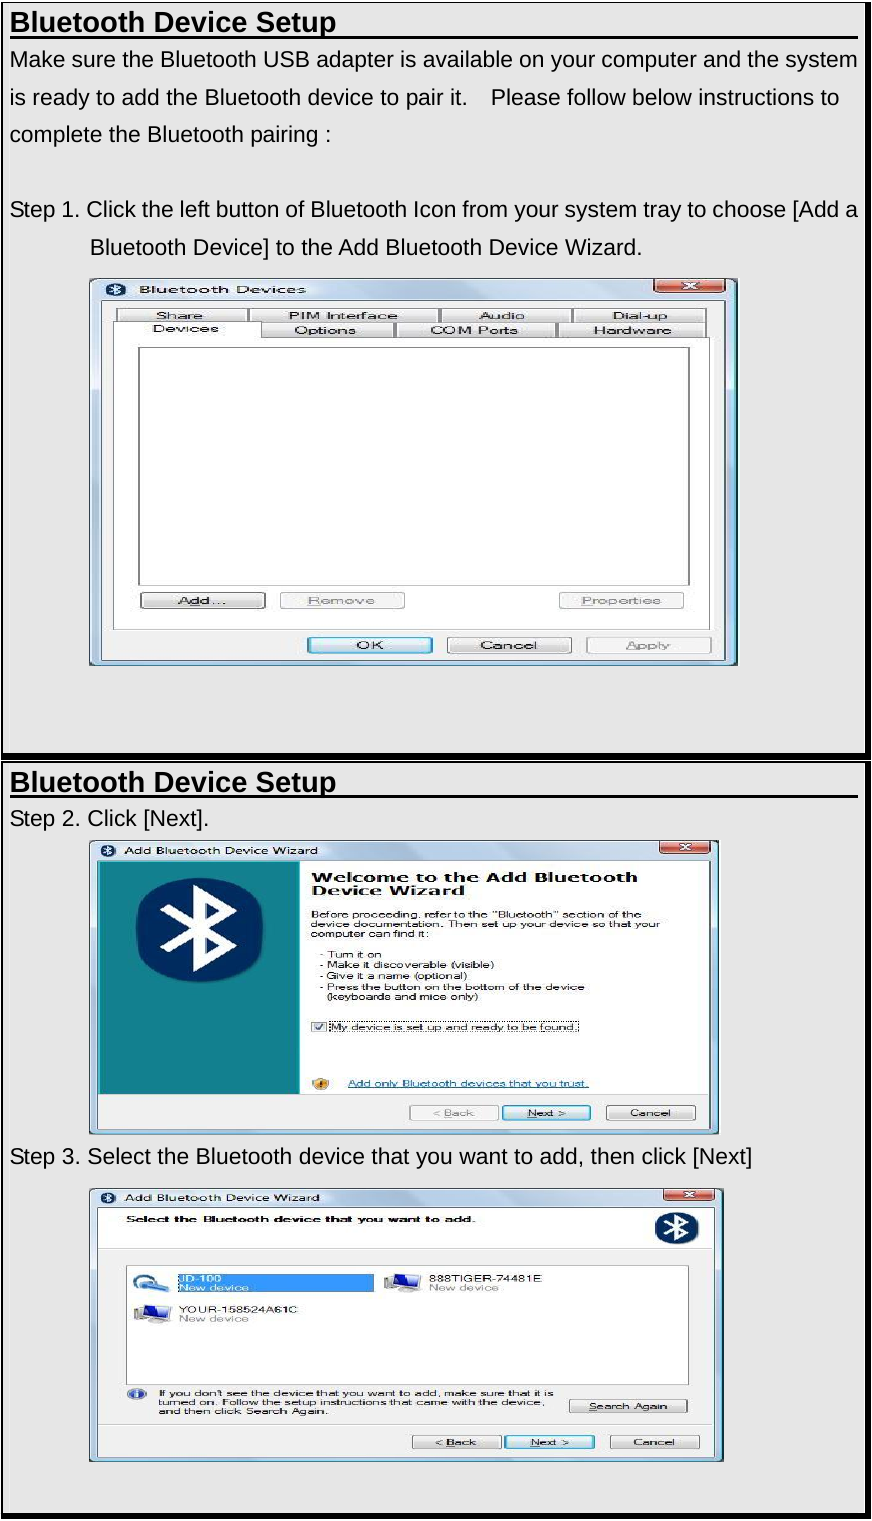 Bluetooth Device Setup                                     Make sure the Bluetooth USB adapter is available on your computer and the system is ready to add the Bluetooth device to pair it.    Please follow below instructions to complete the Bluetooth pairing :  Step 1. Click the left button of Bluetooth Icon from your system tray to choose [Add a Bluetooth Device] to the Add Bluetooth Device Wizard.              Bluetooth Device Setup                                     Step 2. Click [Next].          Step 3. Select the Bluetooth device that you want to add, then click [Next]           